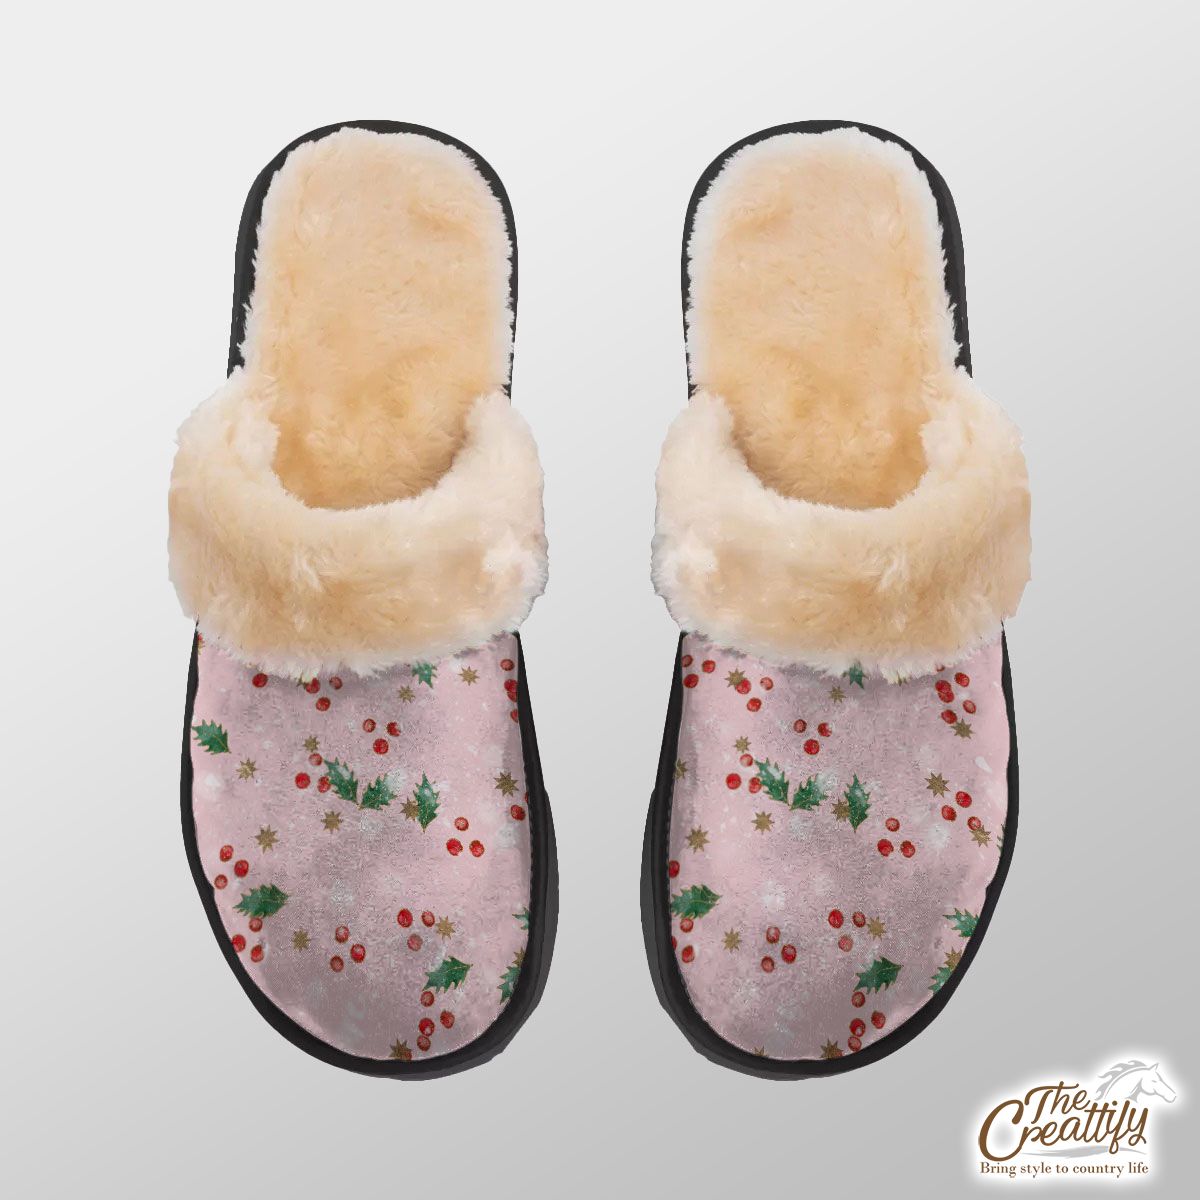 Holly Leaf With Christmas Star Pattern Home Plush Slippers